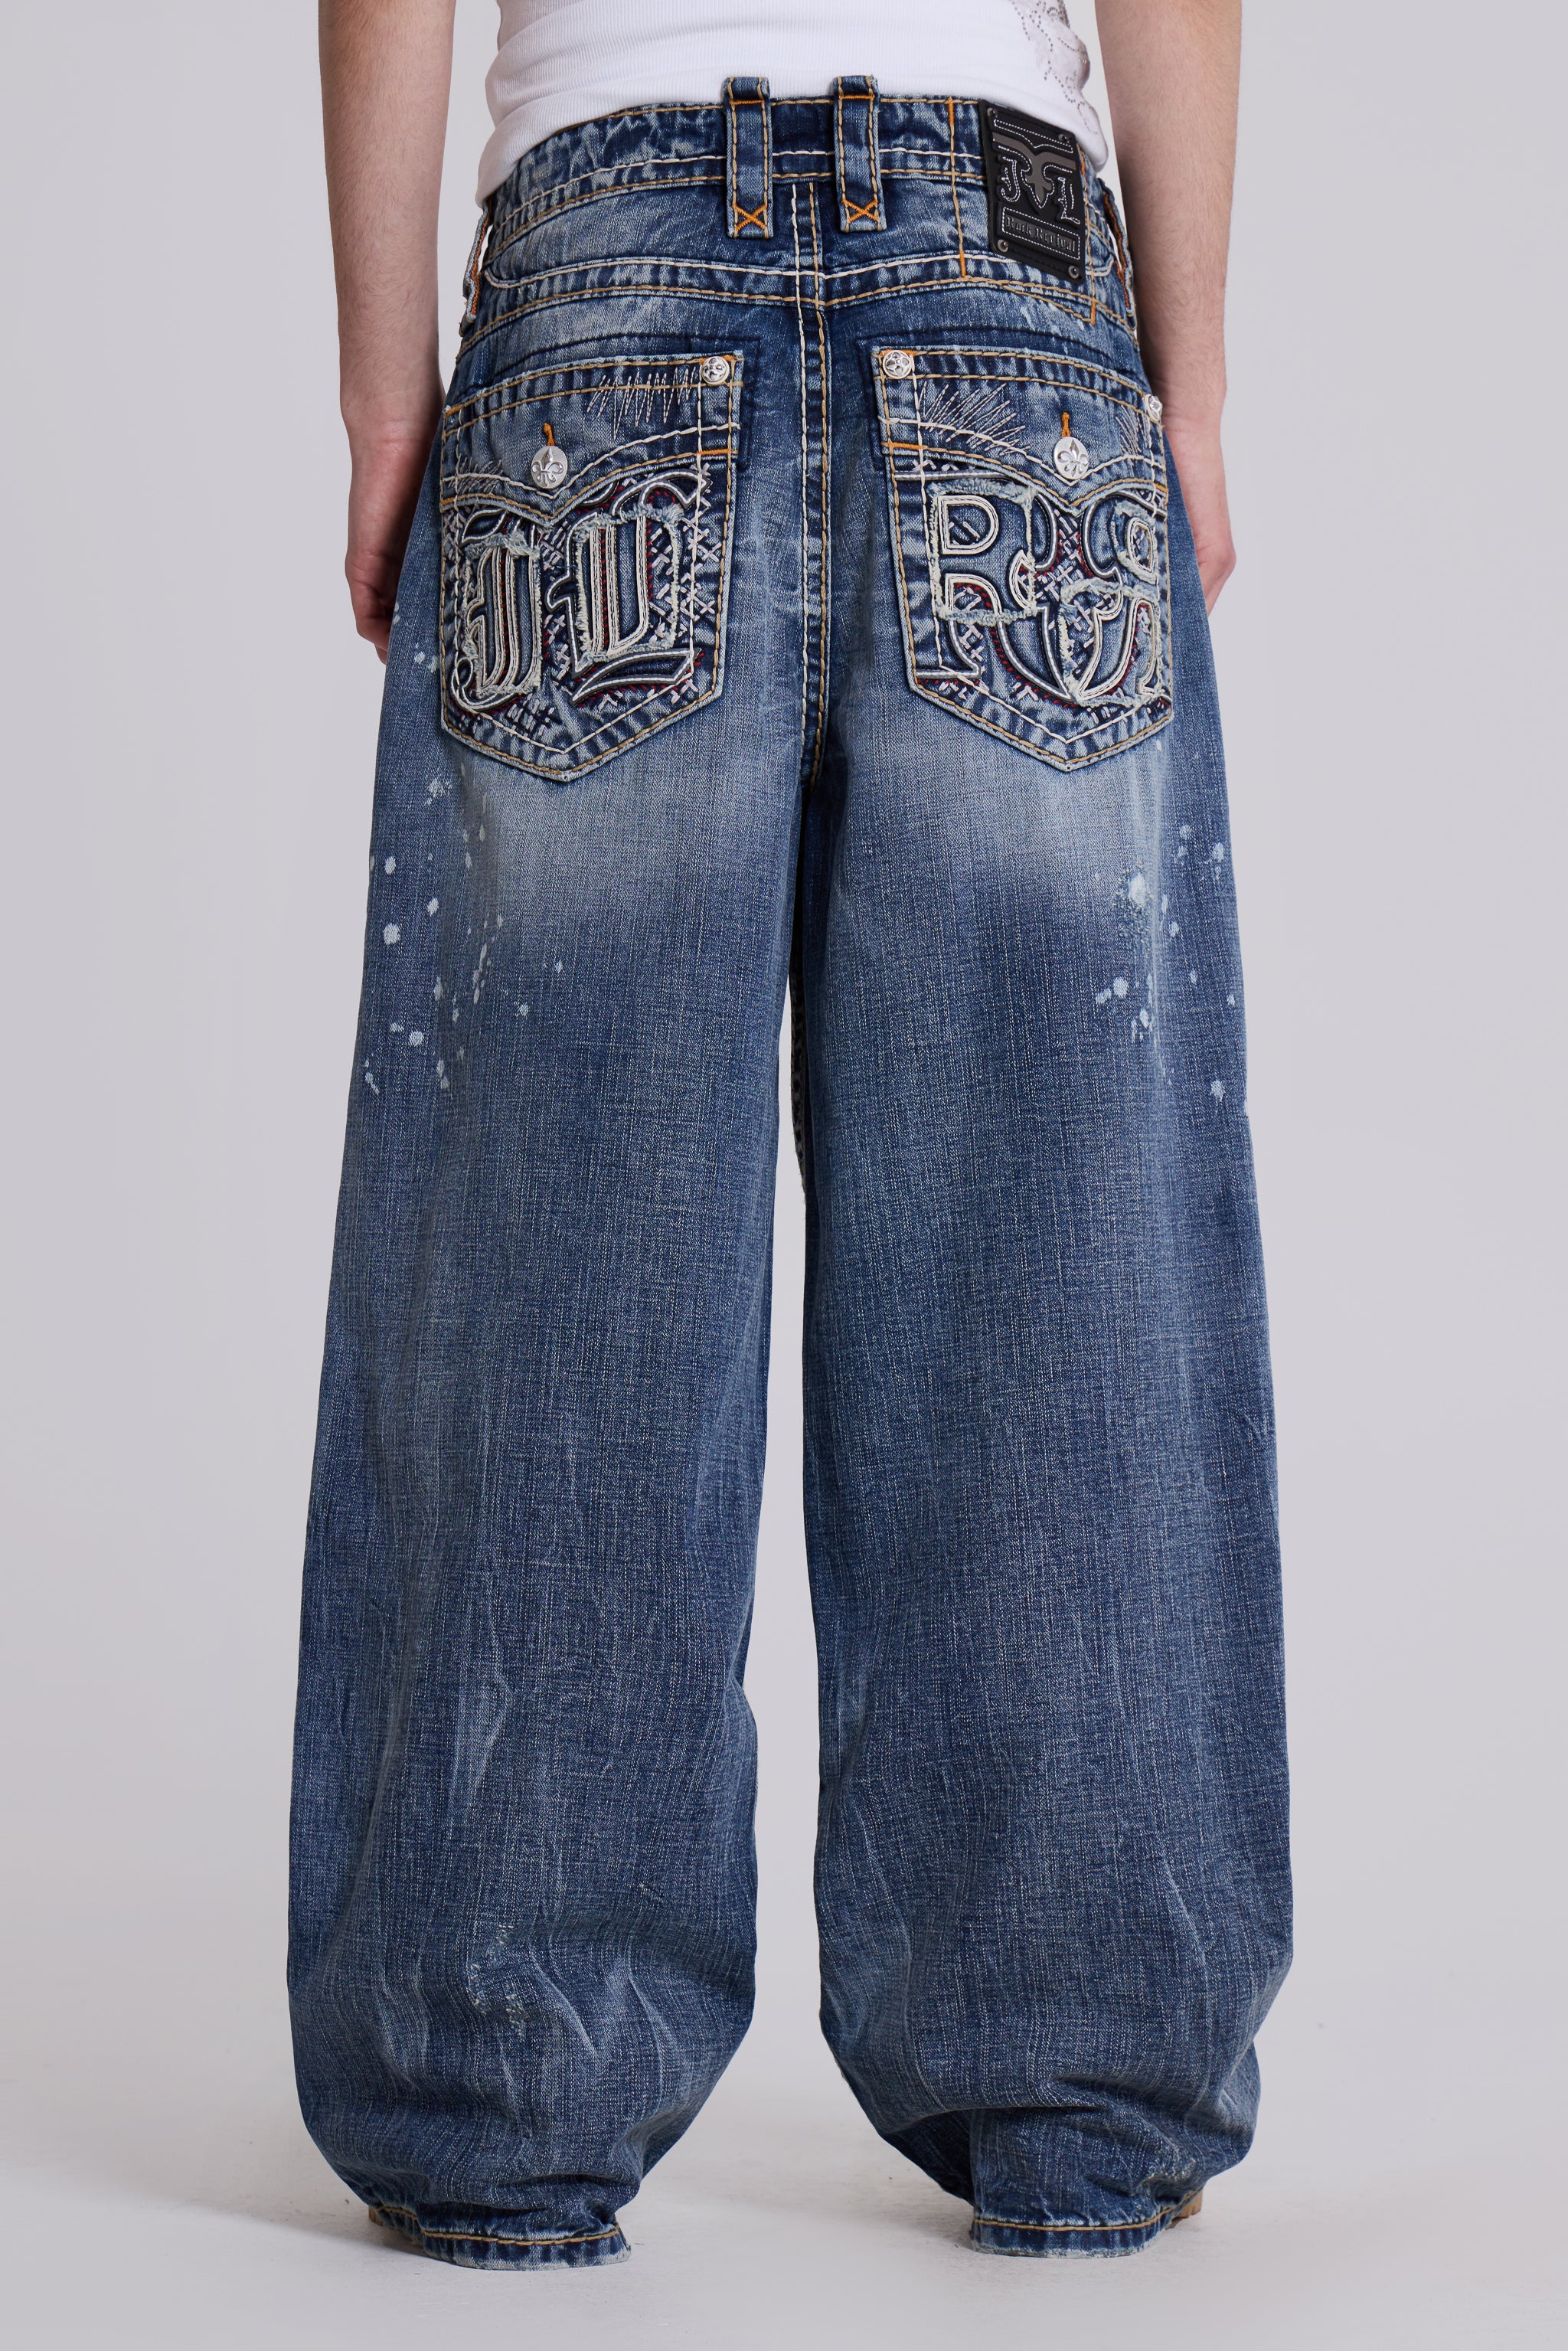 Men's Baggy Jeans | Leopard Colossus Jeans | Jaded London